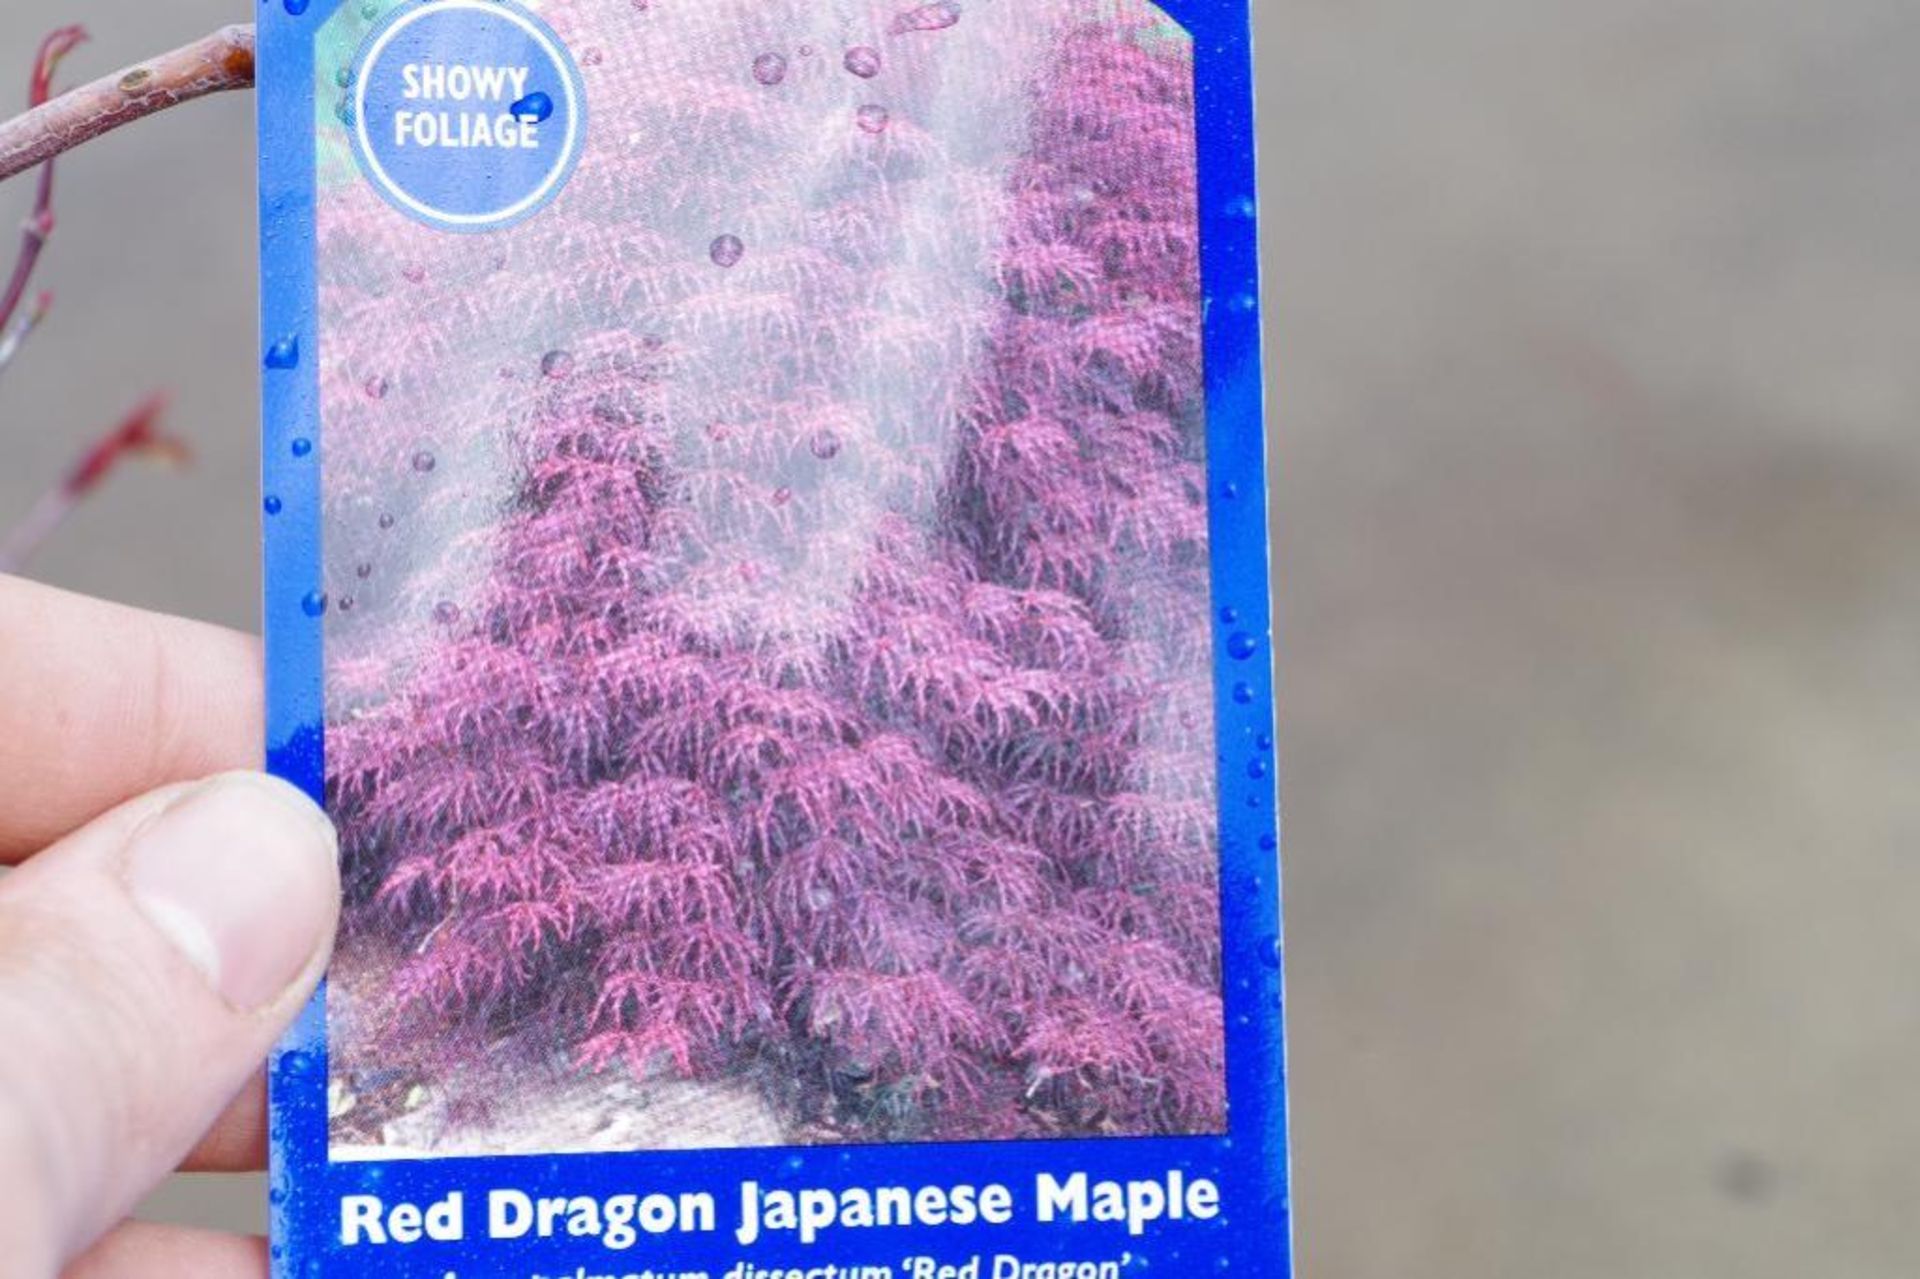 Red Dragon Japanese Maple - Image 3 of 3